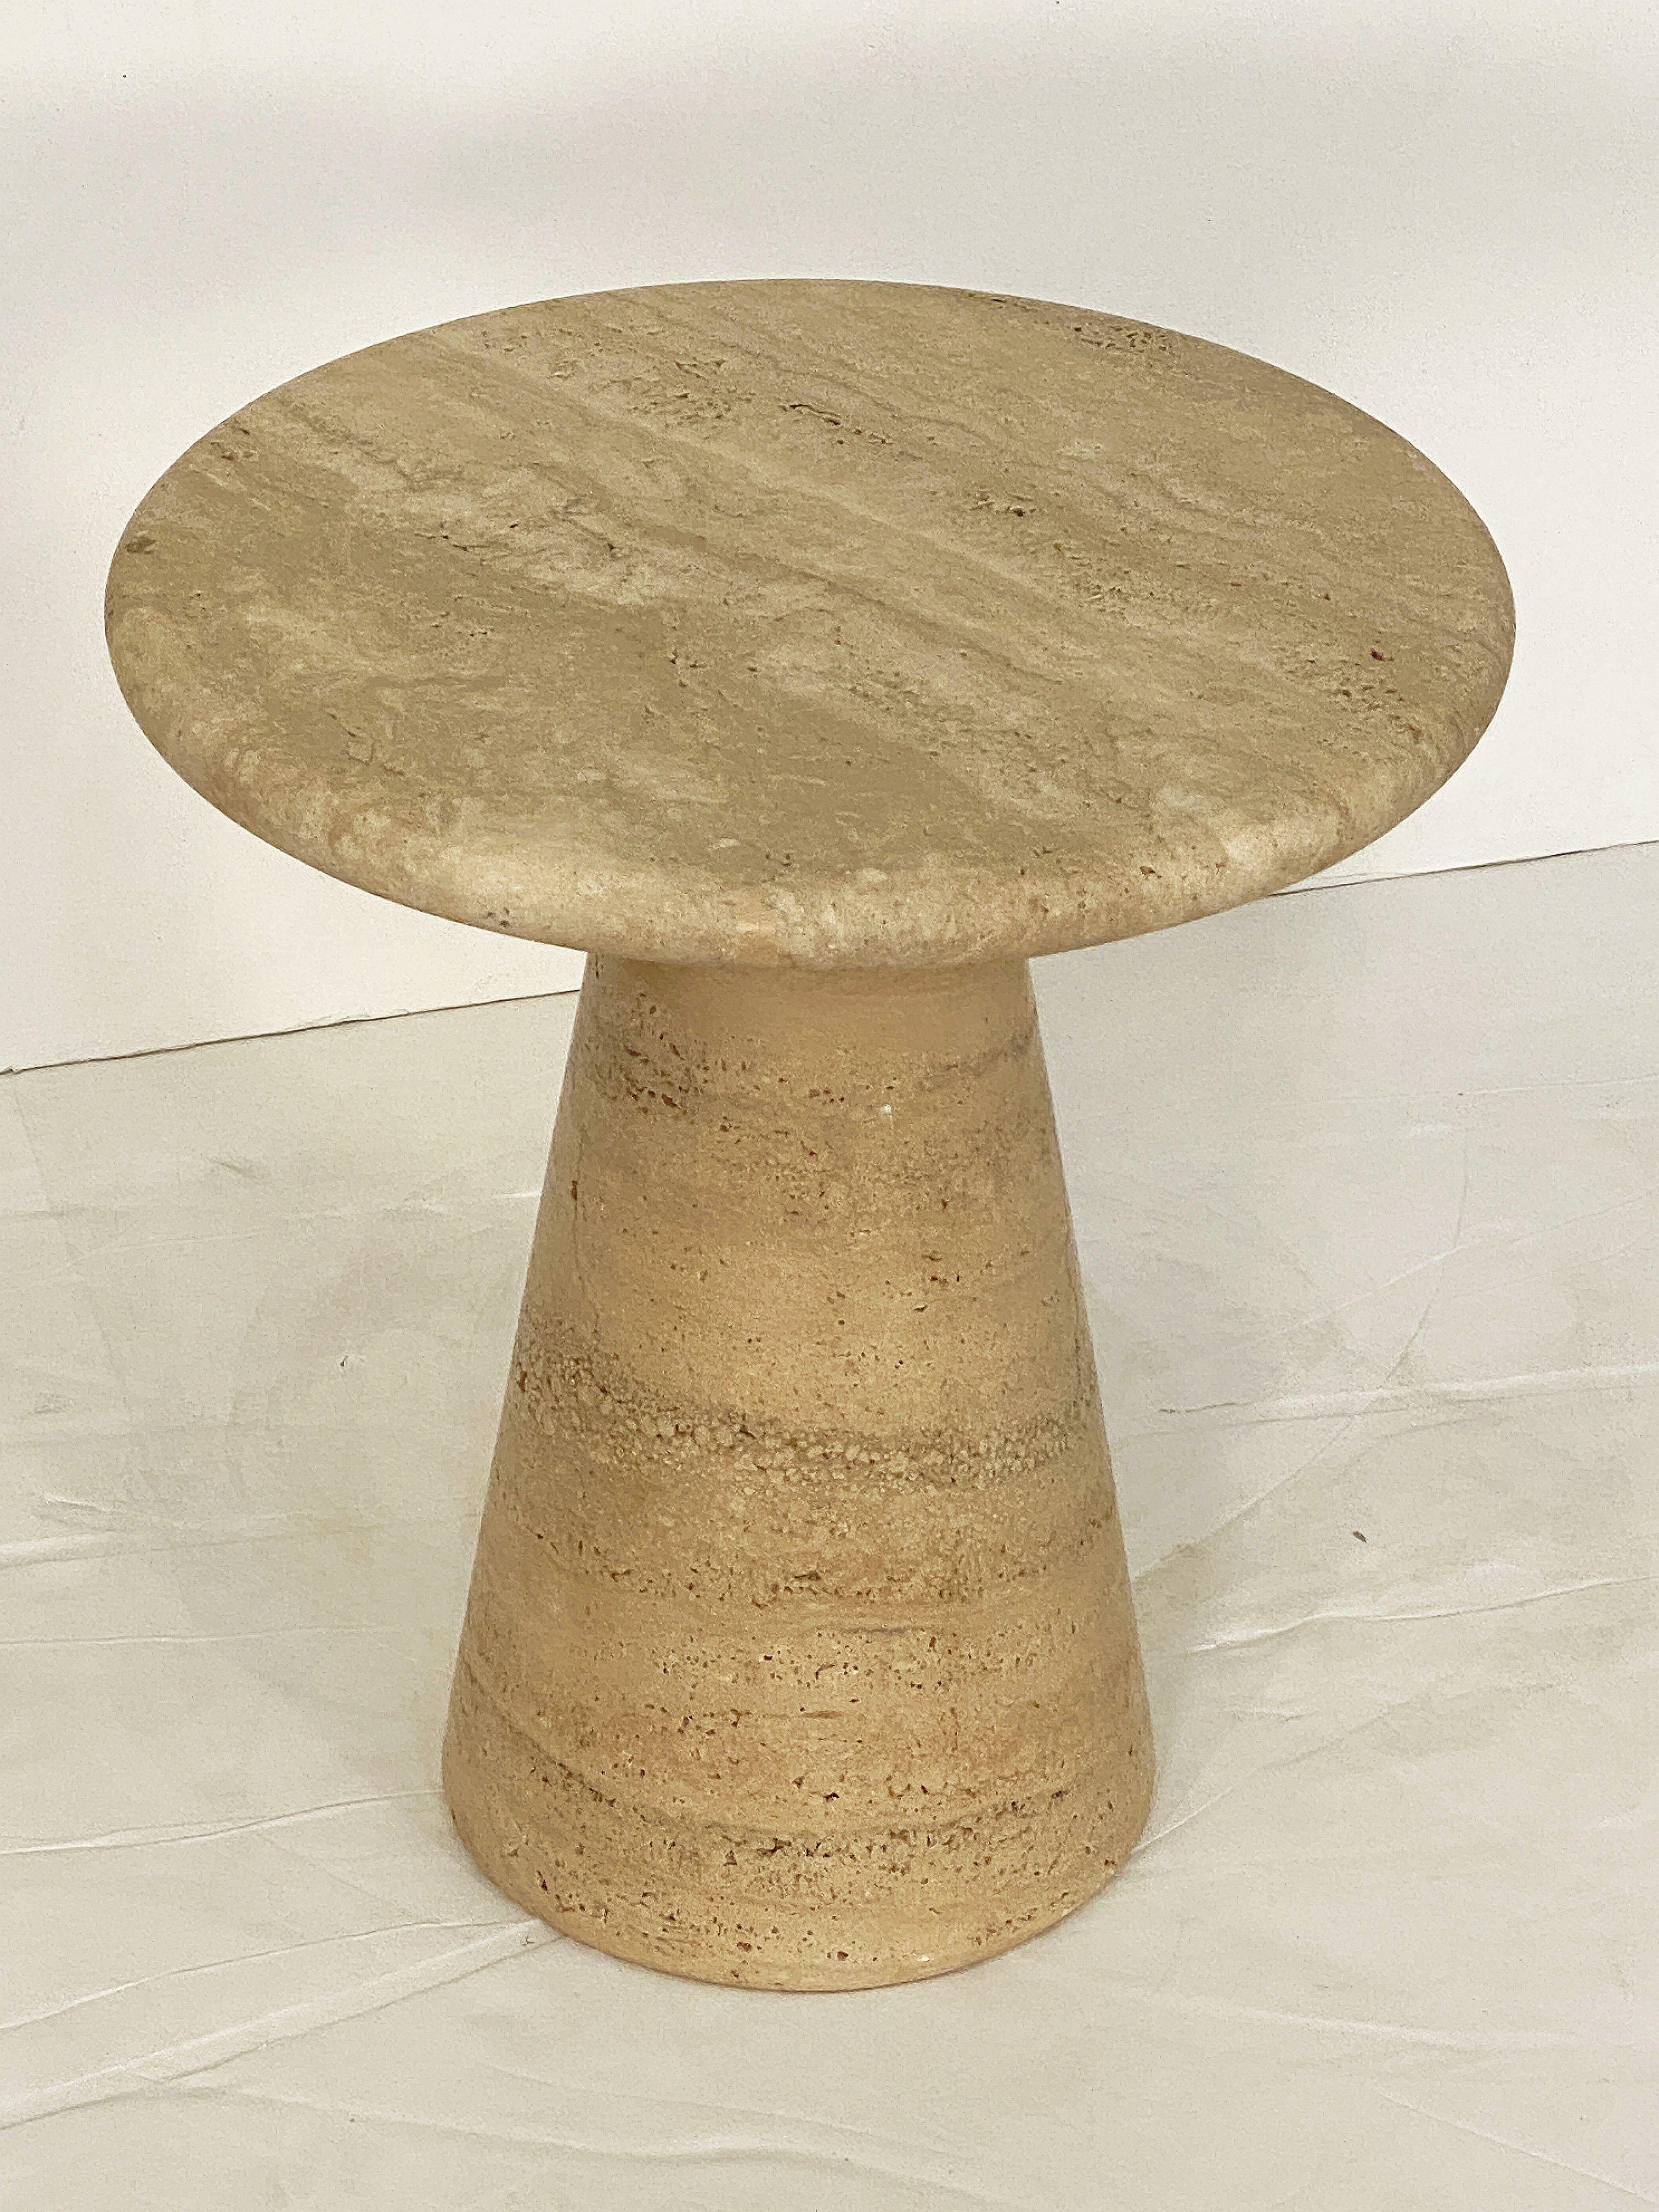 A fine Italian side or end table of travertine stone, featuring a circular top attached to a conical-shaped base in a style reminiscent of the Modernist designs of Angelo Mangiarotti.

There are four tables available and each can be displayed